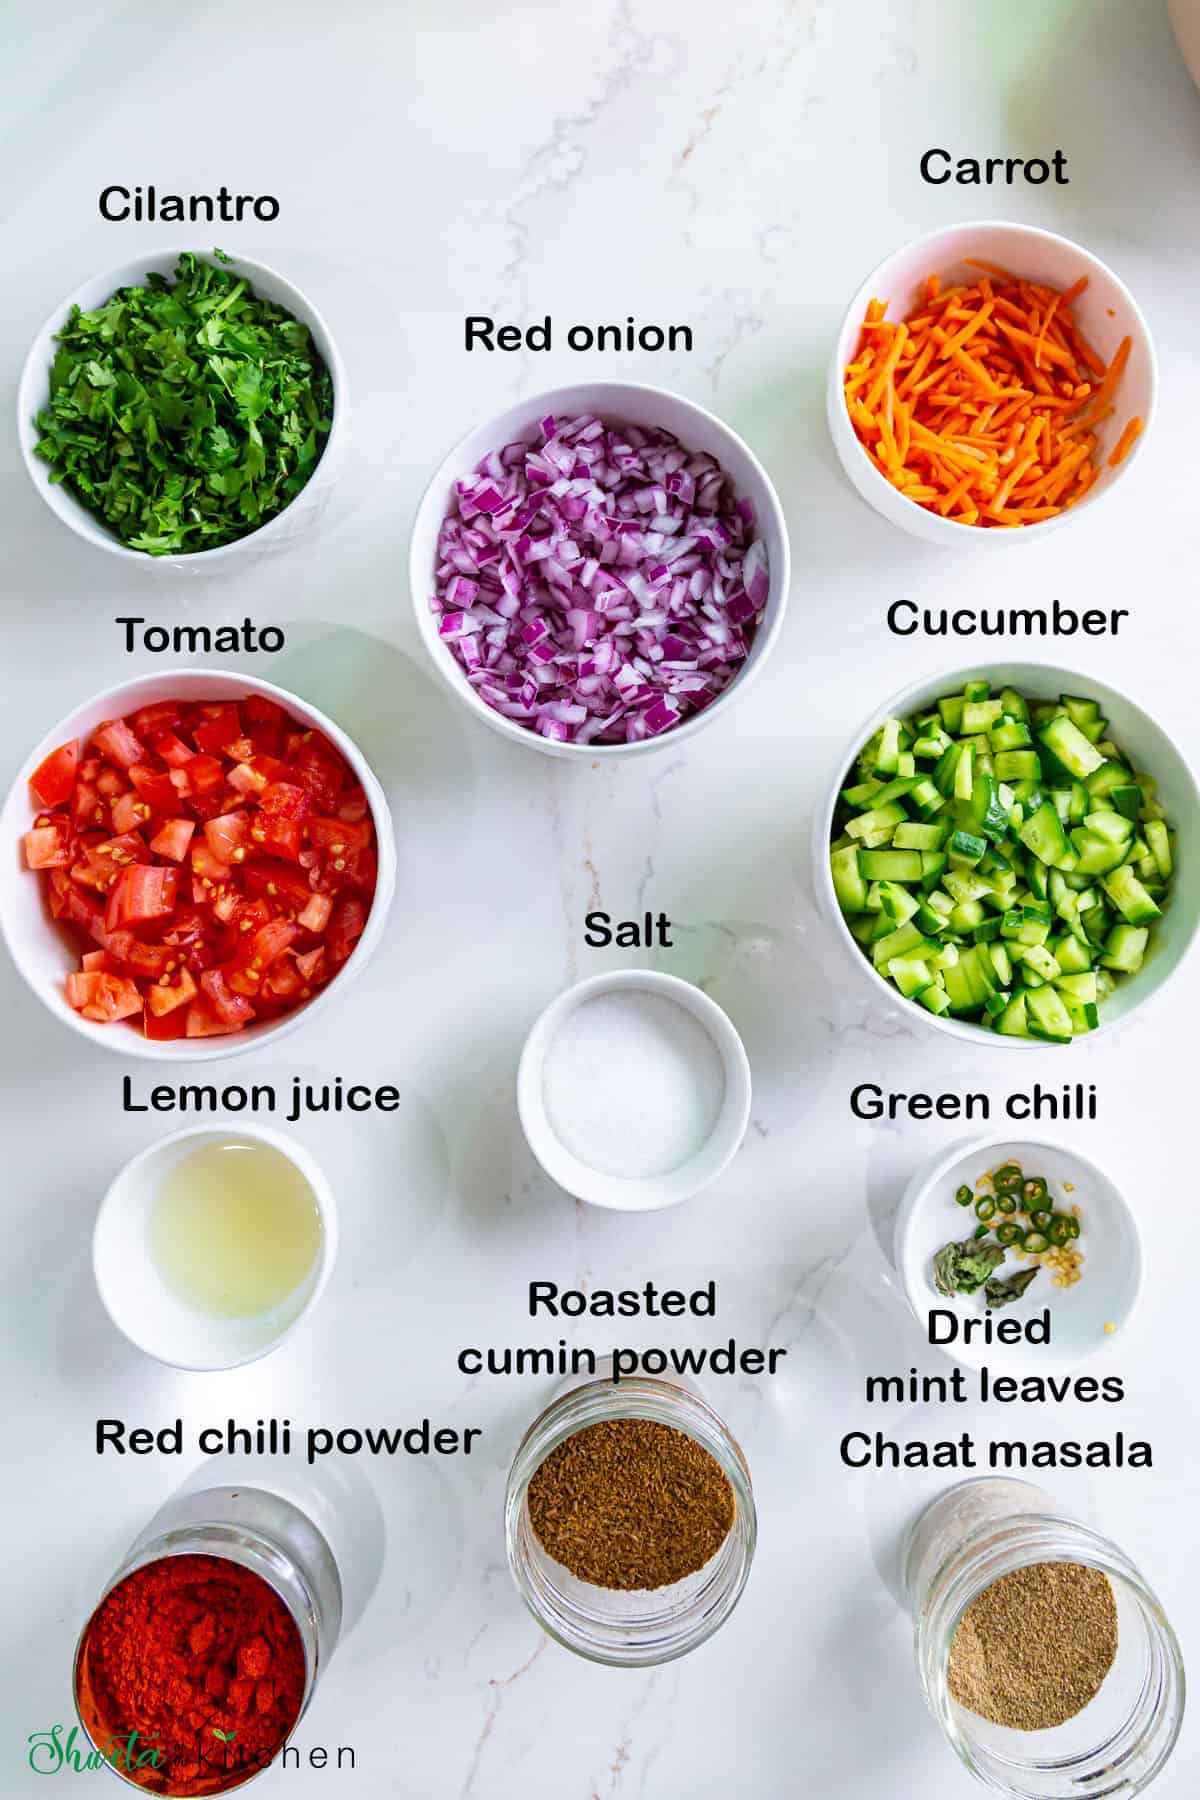 Ingredients for kachumber salad arranged in bowls on white surface